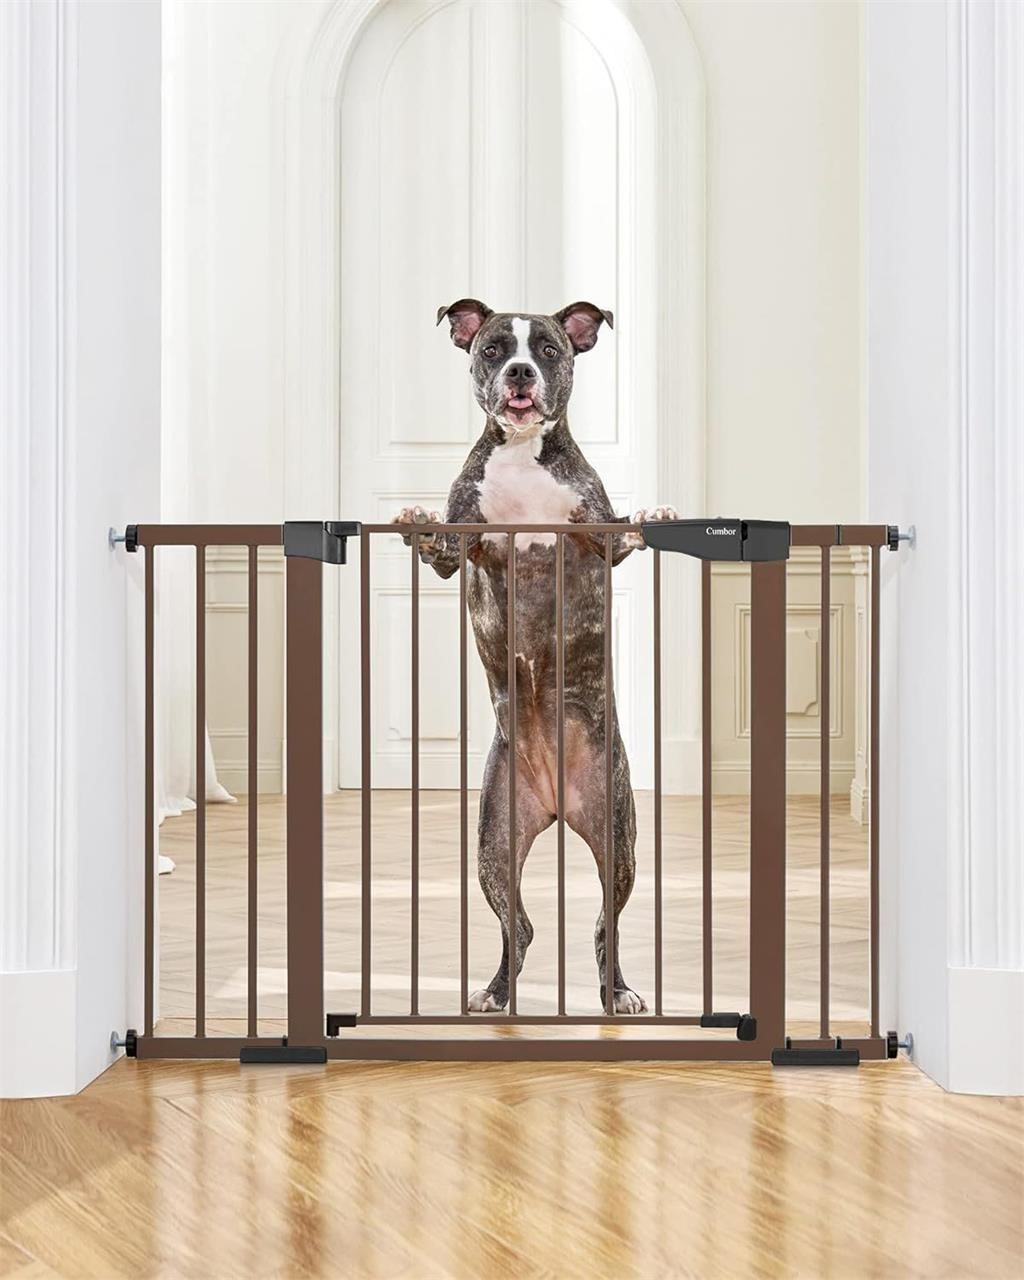 Cumbor 29.7-46" Baby Gate for Stairs